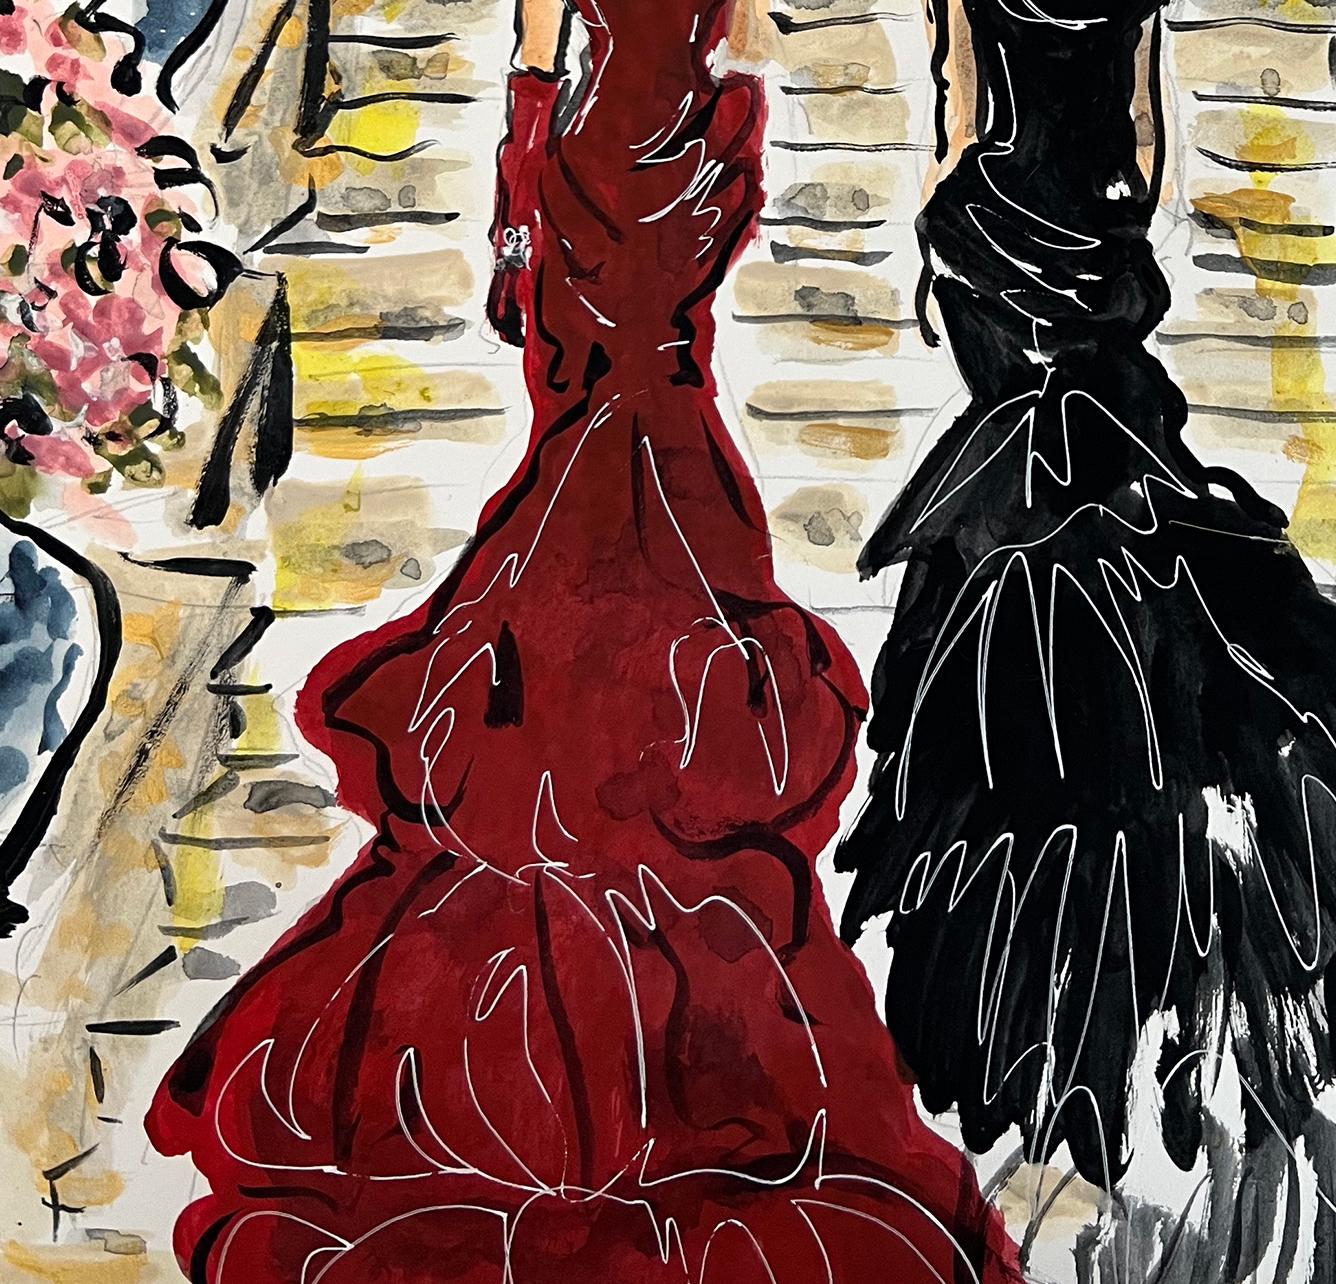 The Museum Gala, by Manuel Santelices
Ink, watercolor and gouache on paper
Image size: 12 in. H x 9 in. W 
Unframed
2023

The worlds of fashion, society, and pop culture are explored through the illustrations of Manuel Santelices, a Chilean artist